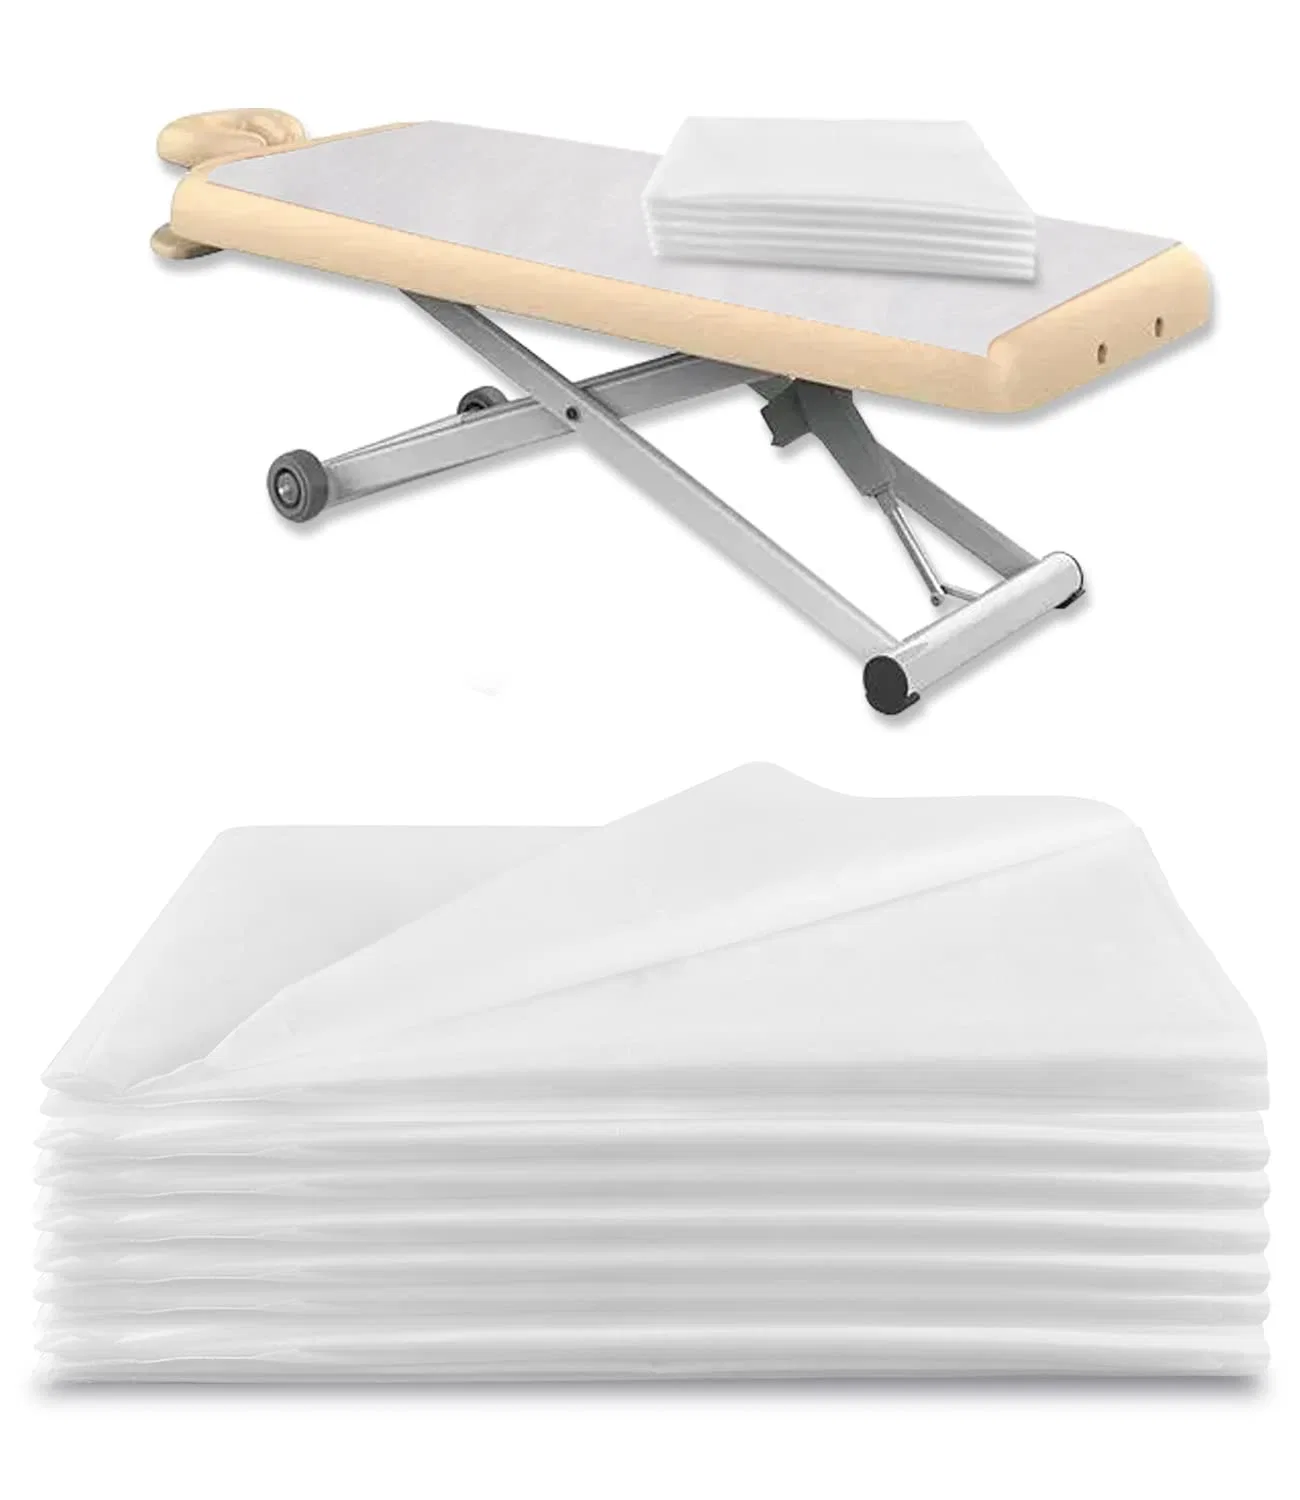 Disposable Massage Table Sheets 100PCS Waterproof, Safely Non-Woven Fabric, for Massage, Tattoo, SPA Bed Sheets